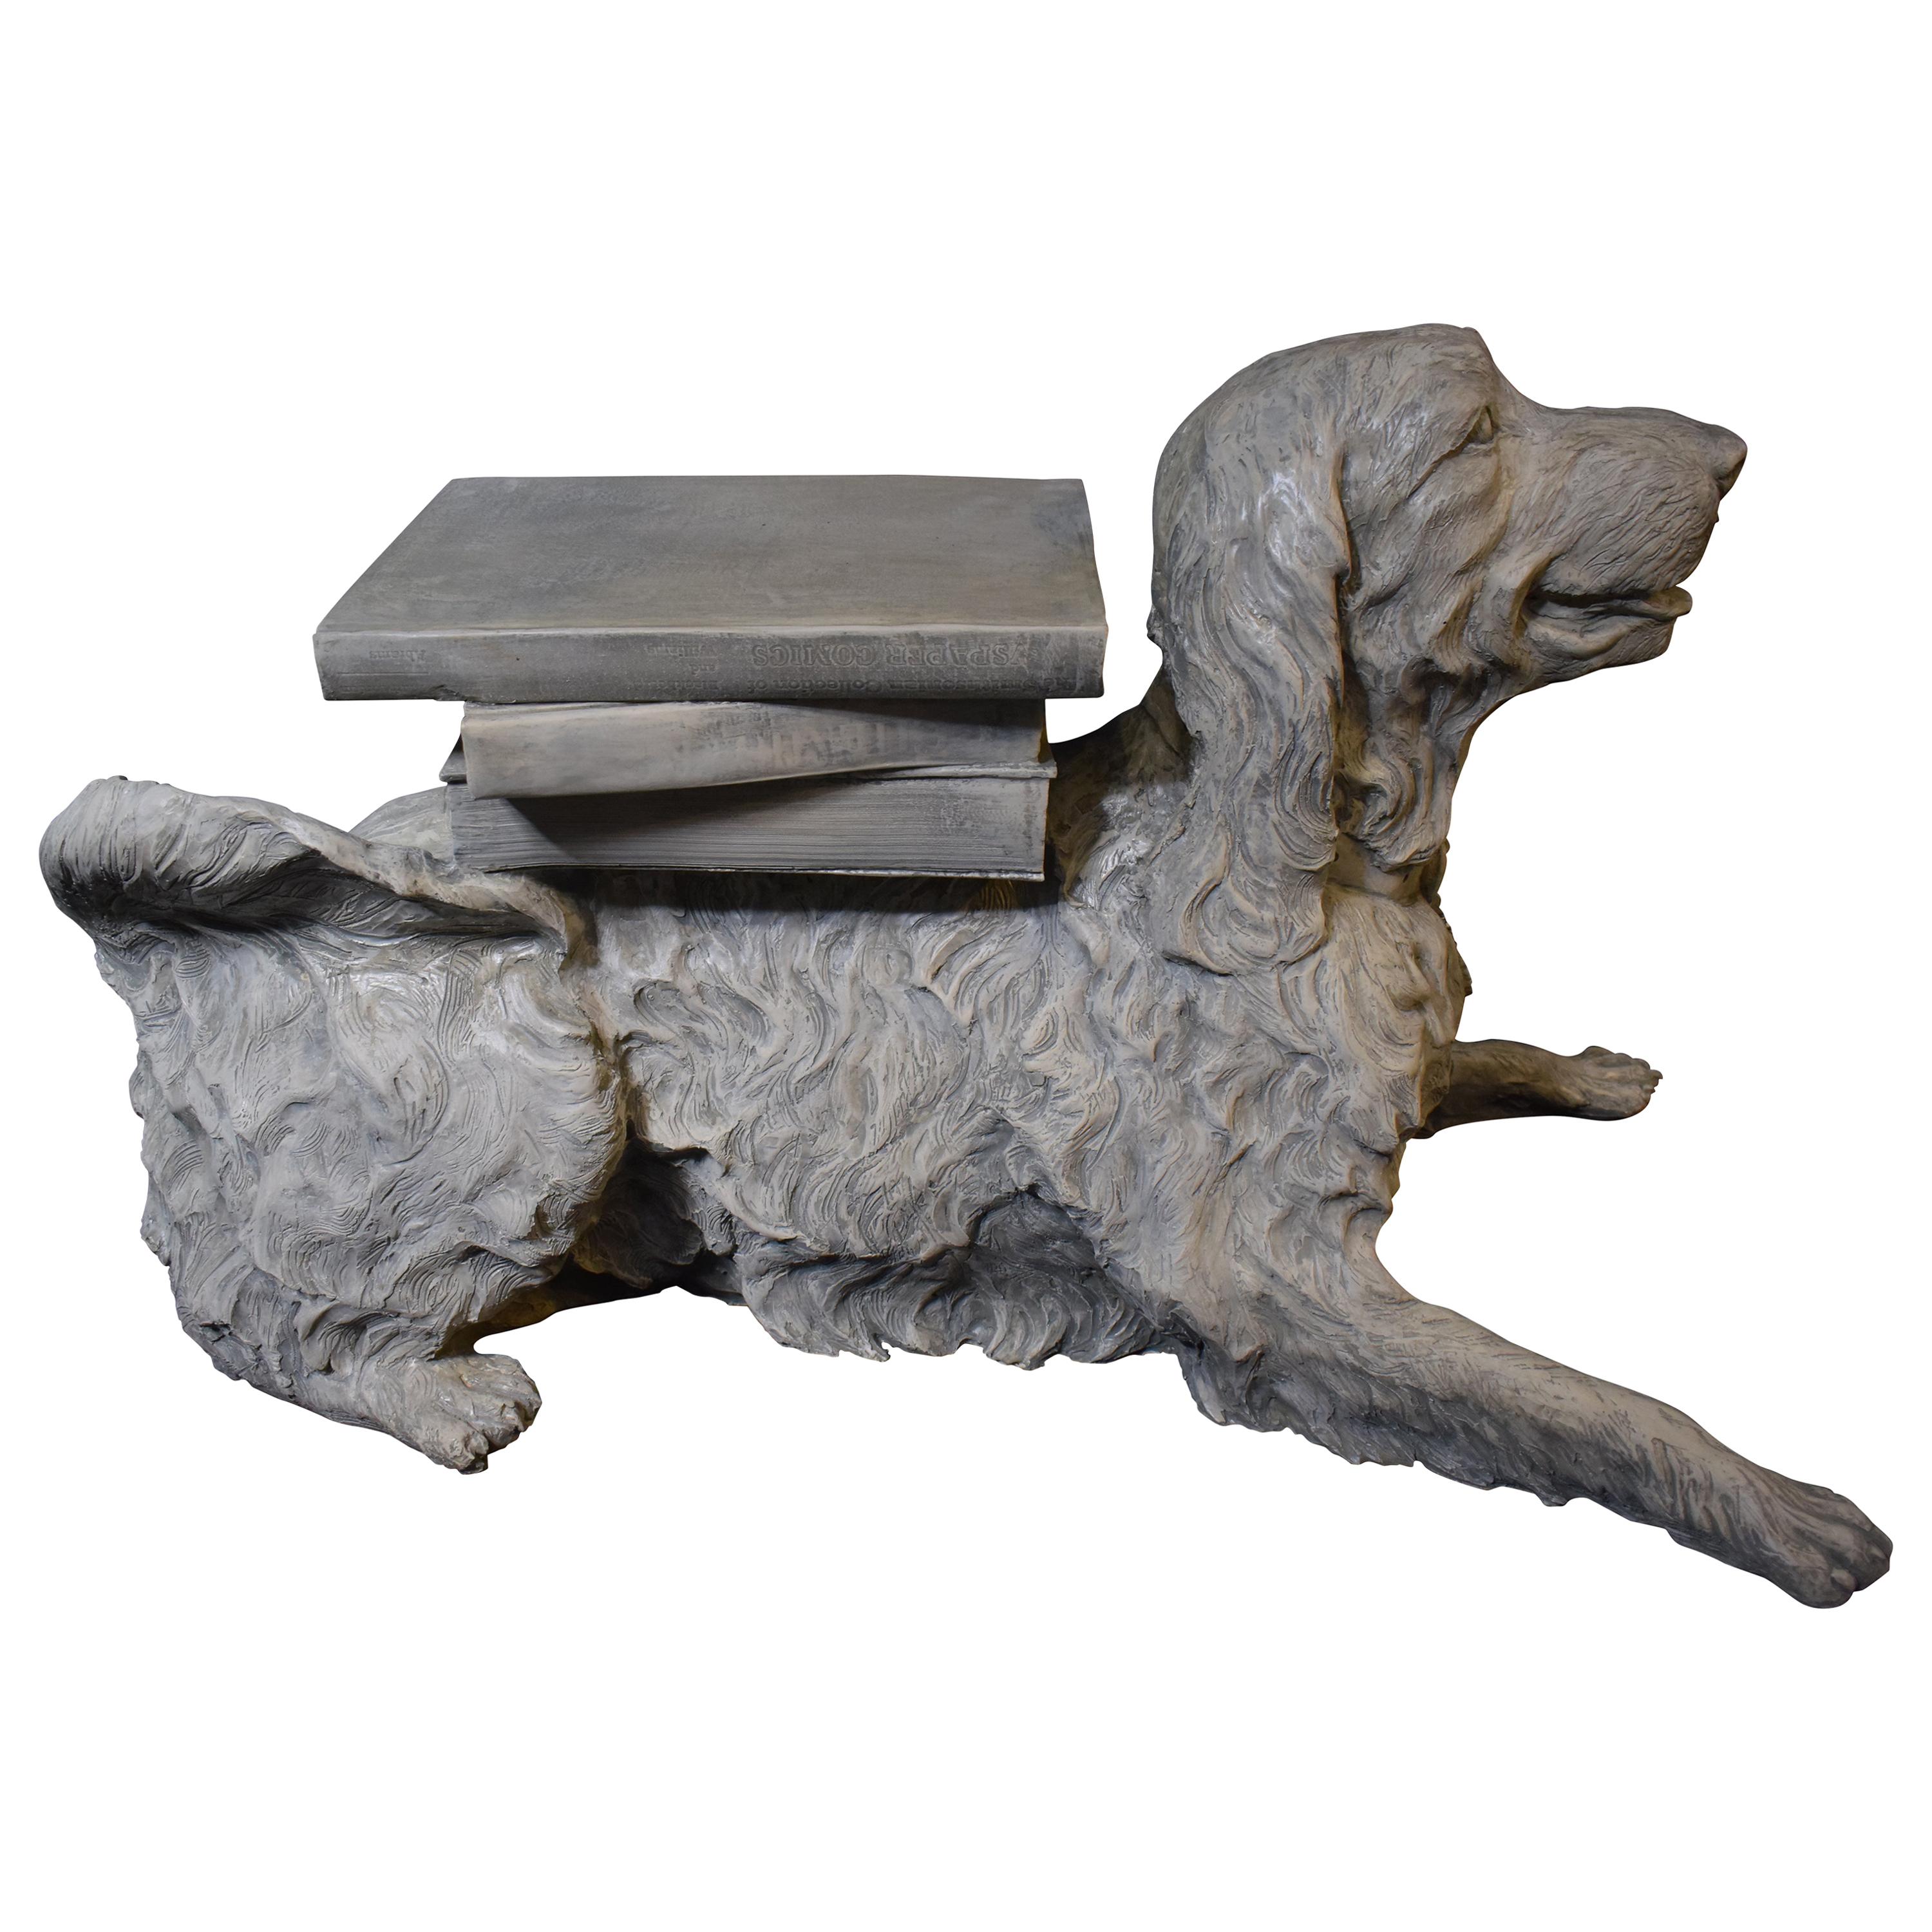 Highly Decorative Full Size Sculpture of a Dog Laying Down